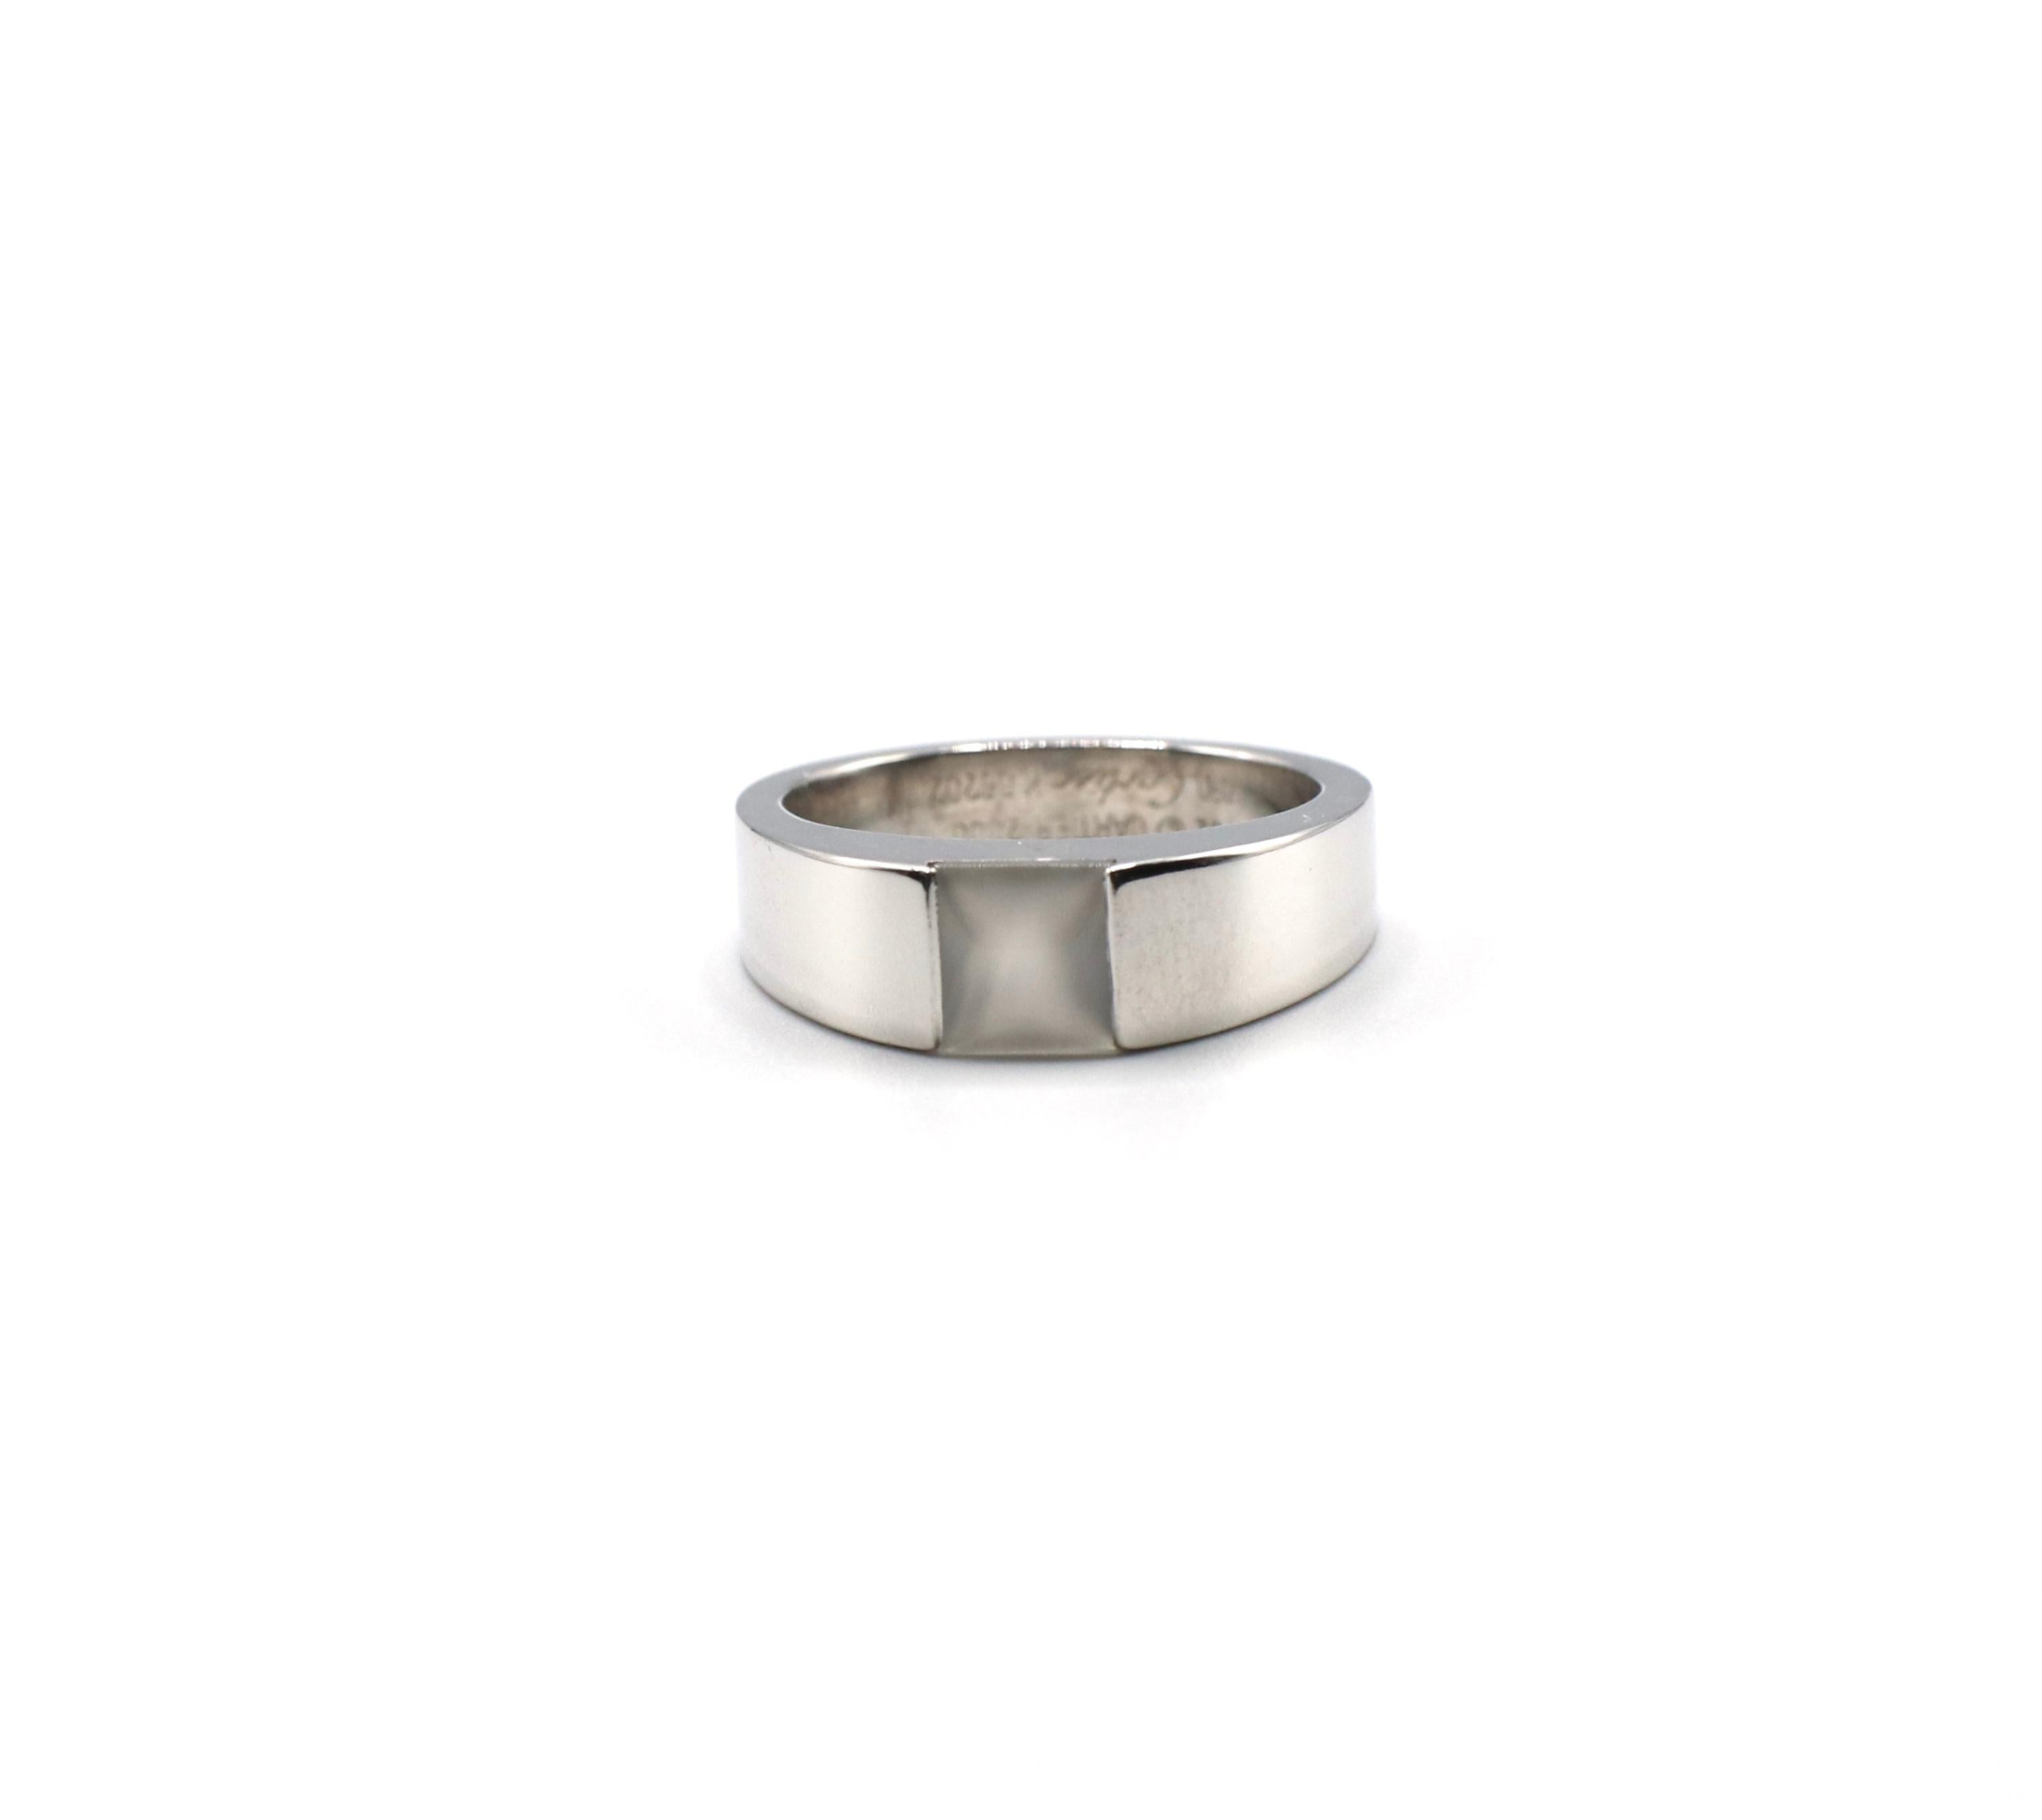 Metal: 18k White Gold 750
Size 52 (US 6) Fits a size 5-5.5 because of thickness of the ring
French hallmarks
Signed 